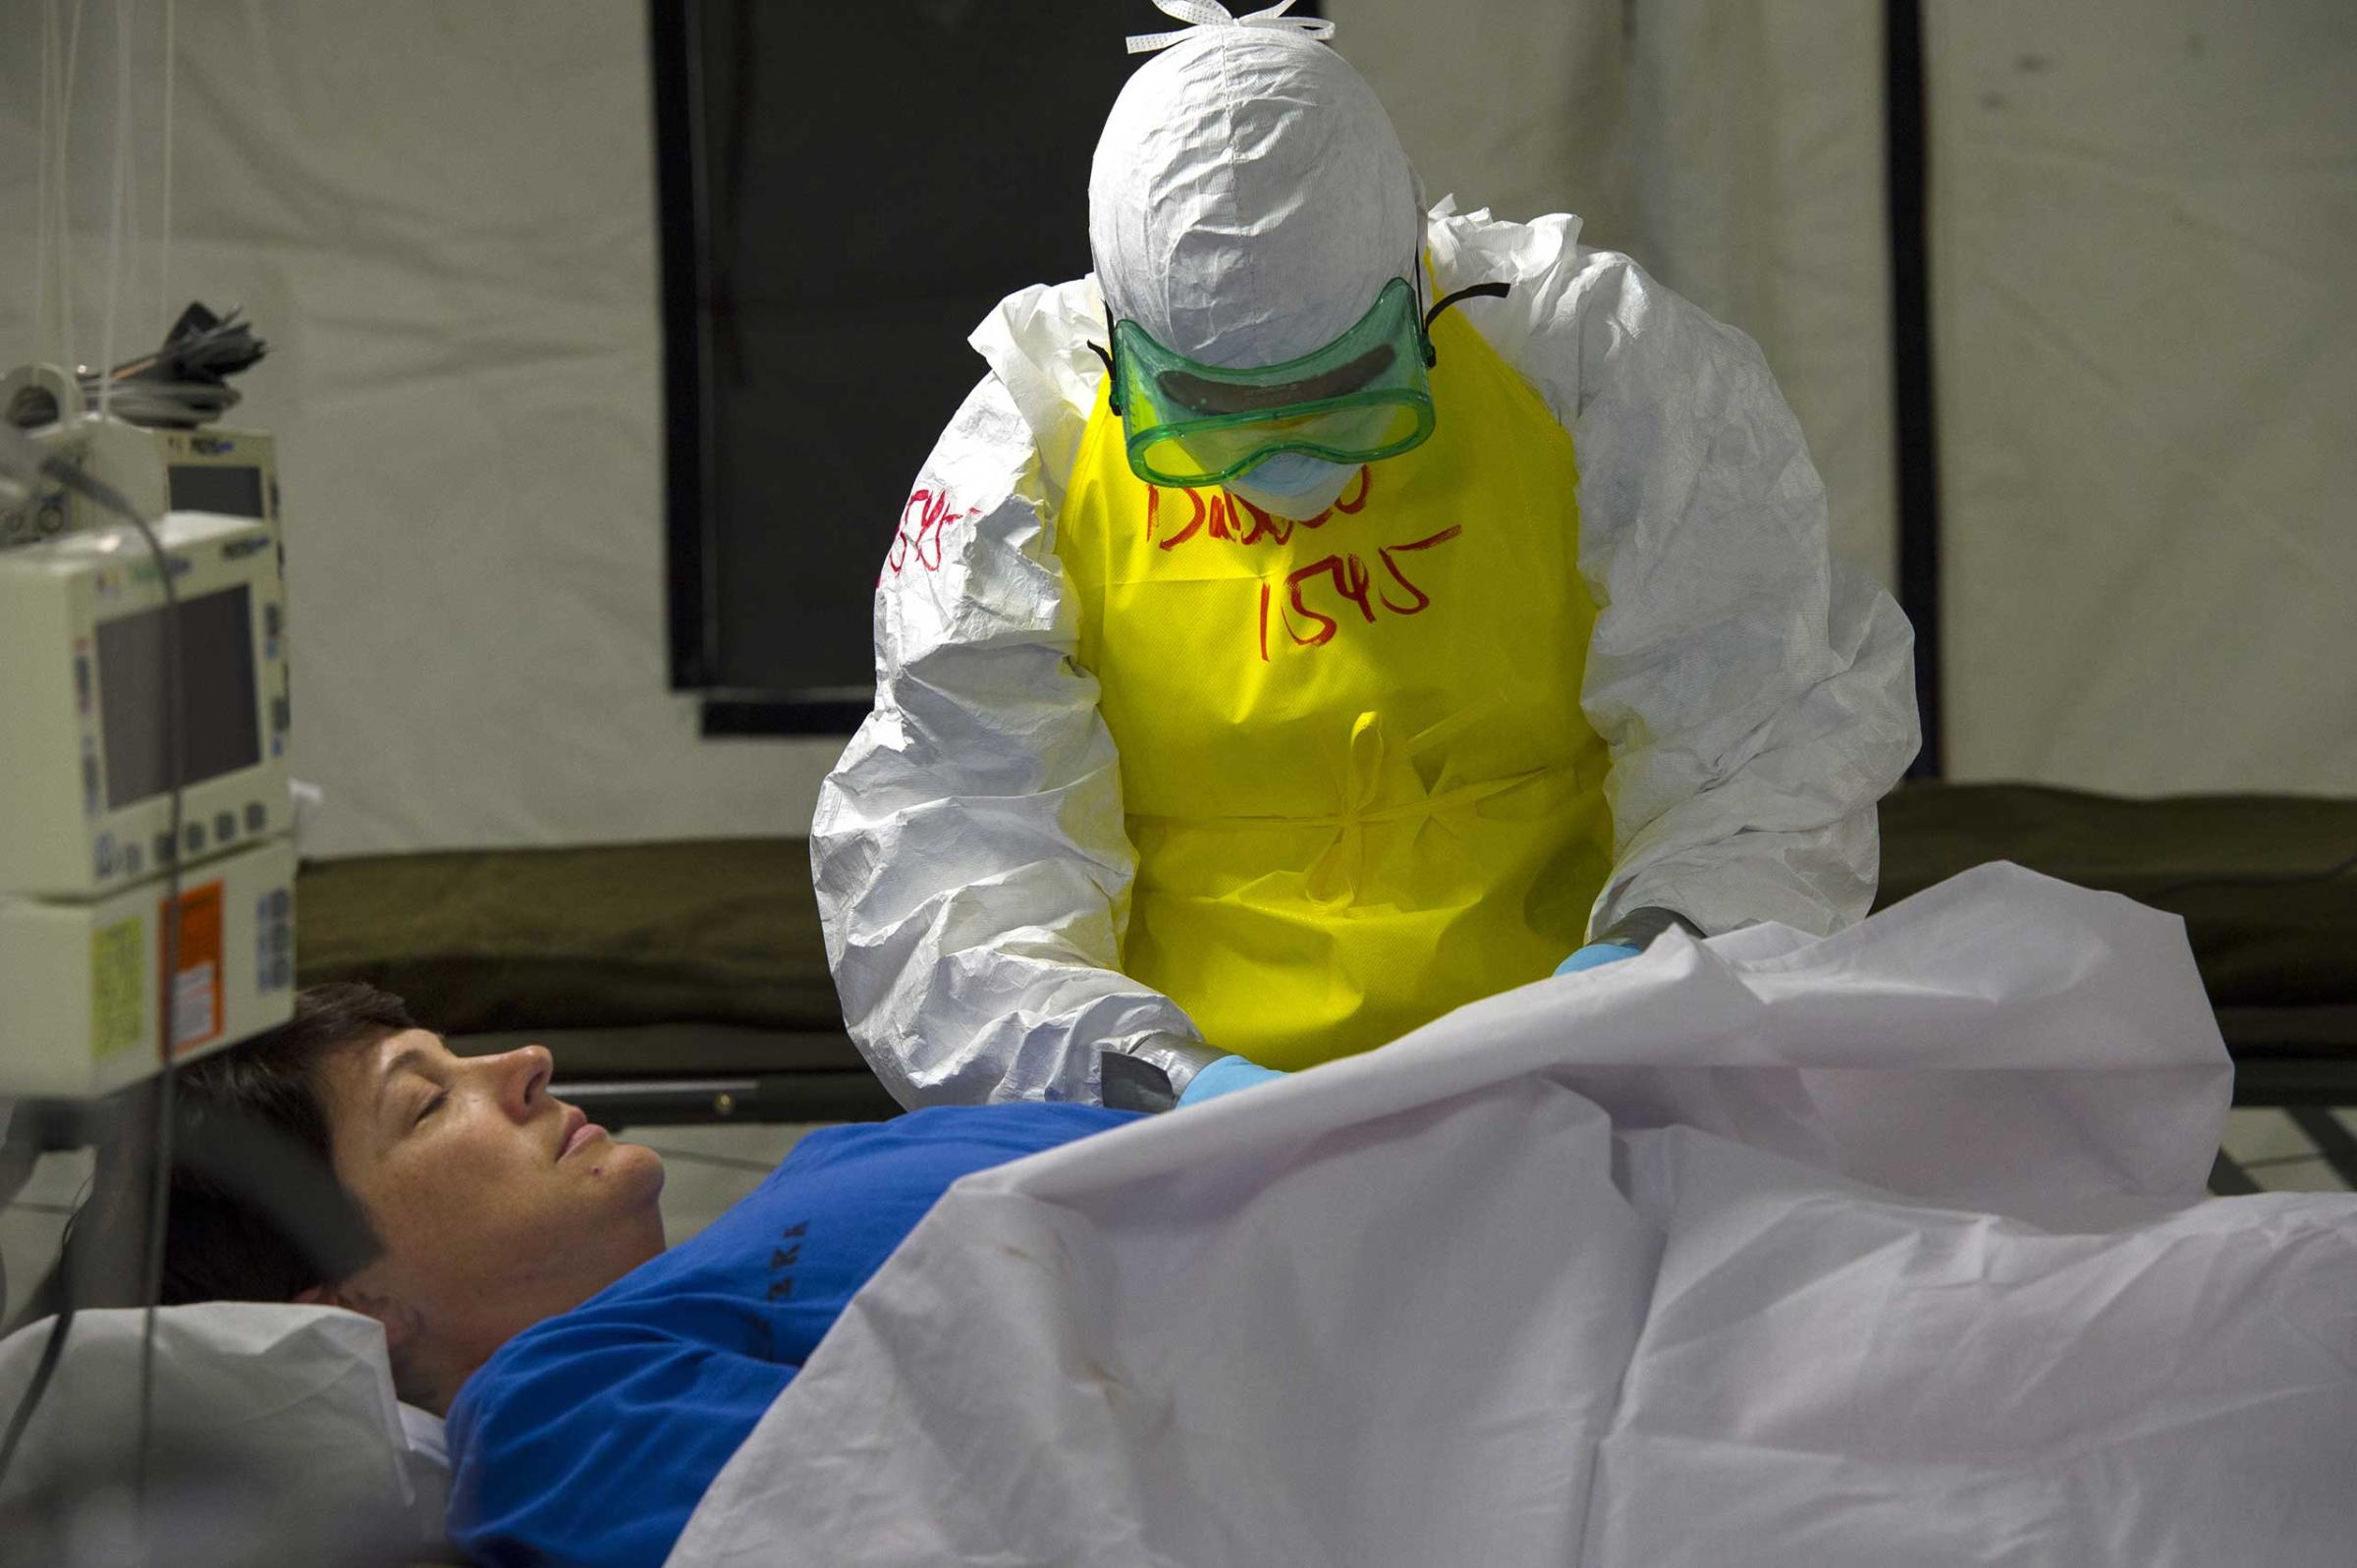 Medical staff members LT. Junior Grade Lauren Ryszka acts as a patient in bed while LT. Junior Grade Victoria D'Addeo simulate treating her as an Ebola patient inside the Monrovia Medical Unit on Nov. 4, in Monrovia, Liberia.